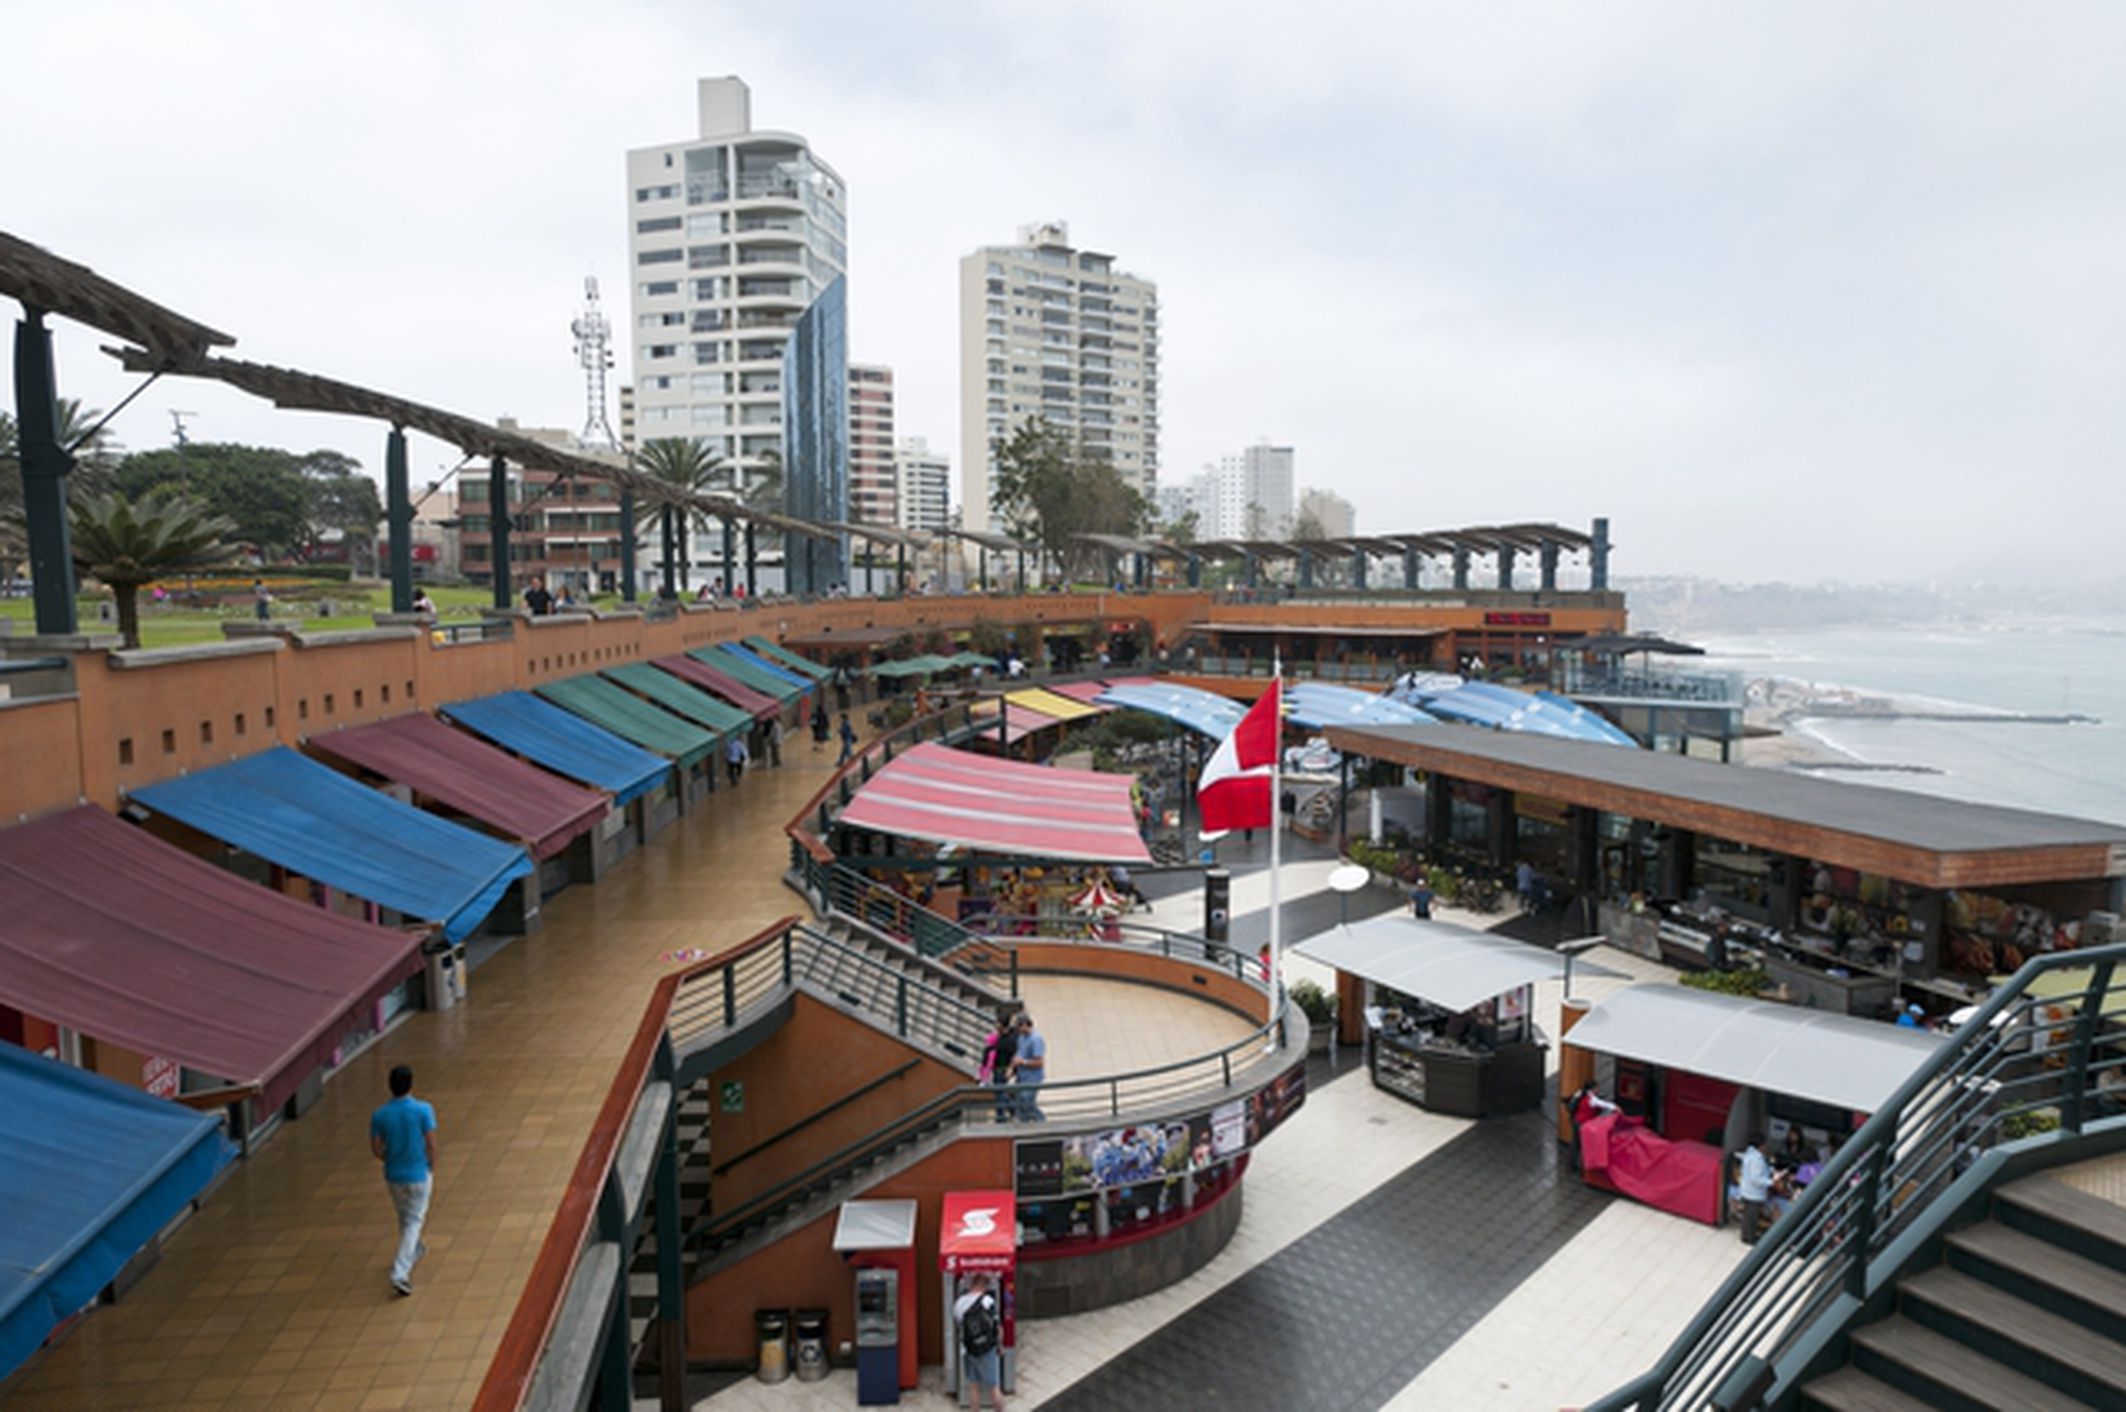 A Guide to Larcomar Shopping Center in Lima